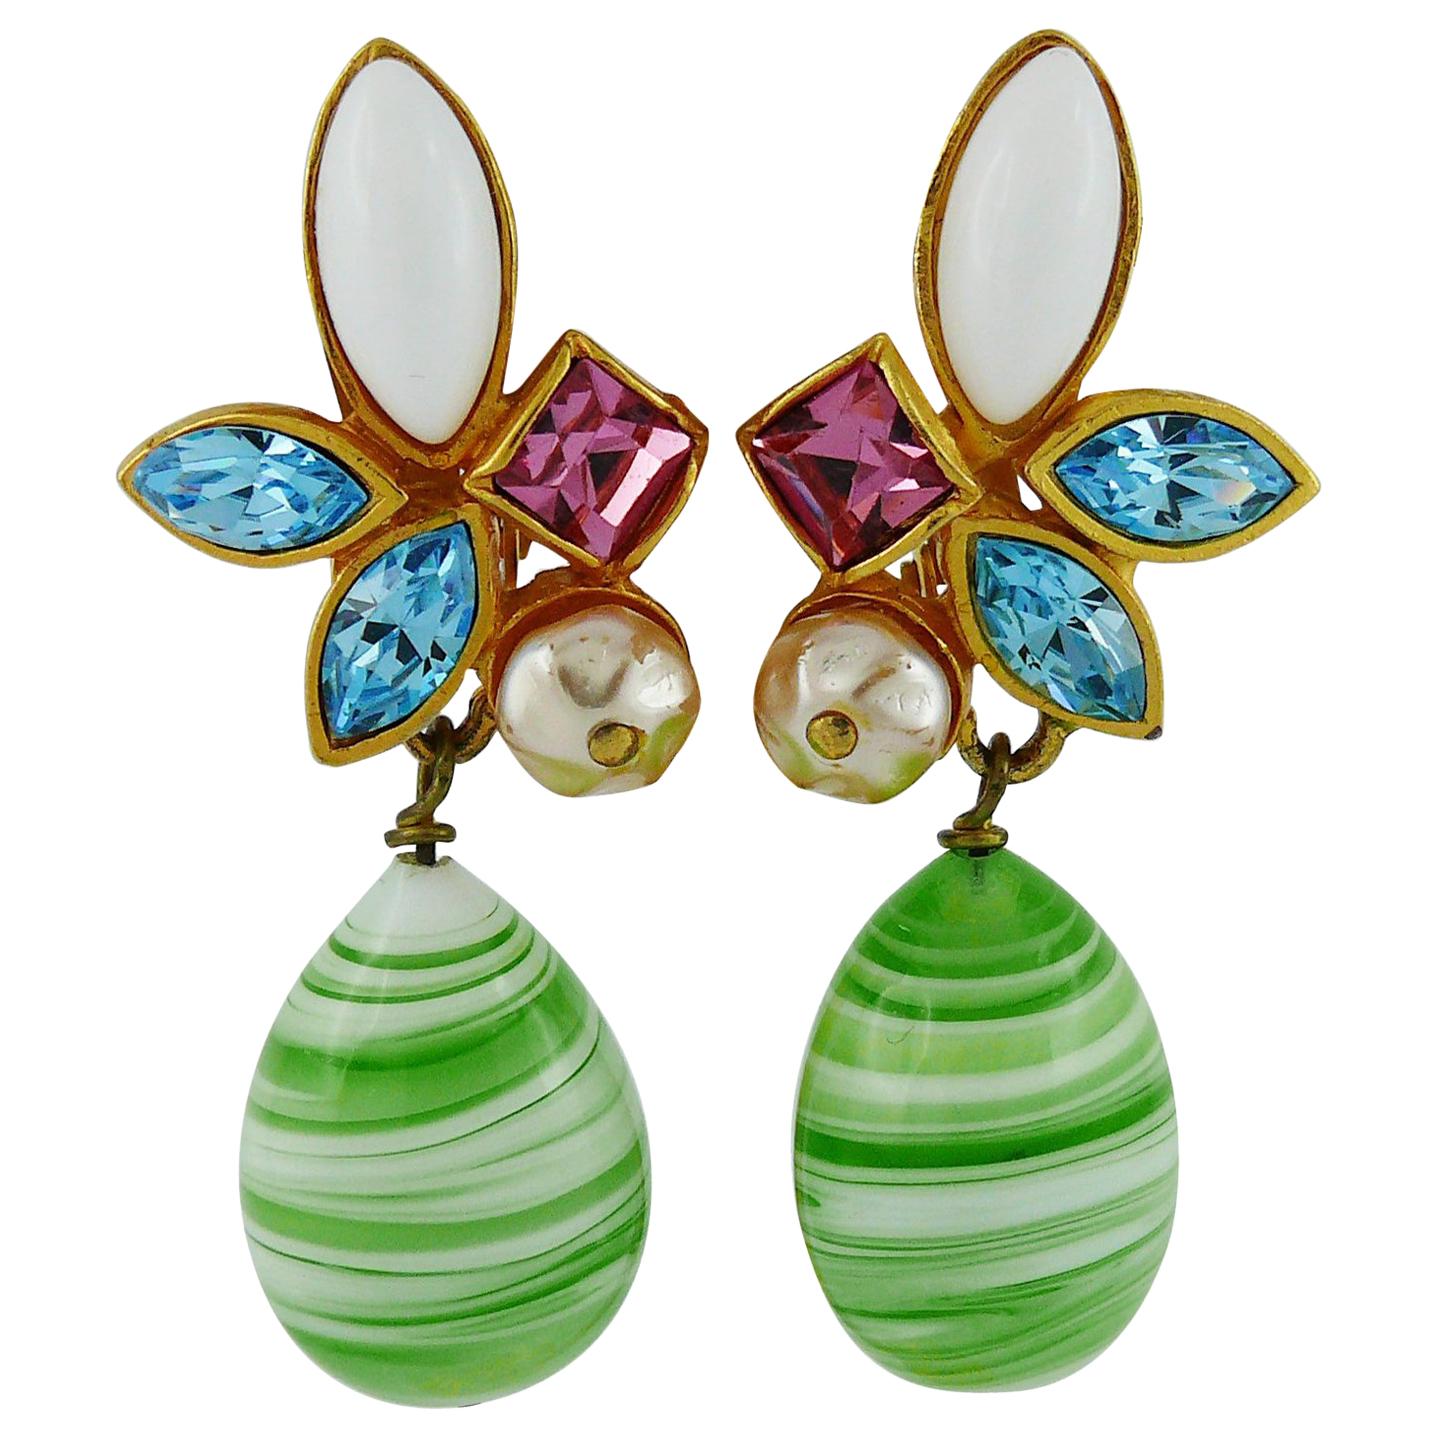 Christian Lacroix Vintage Jewelled Dangling Earrings For Sale